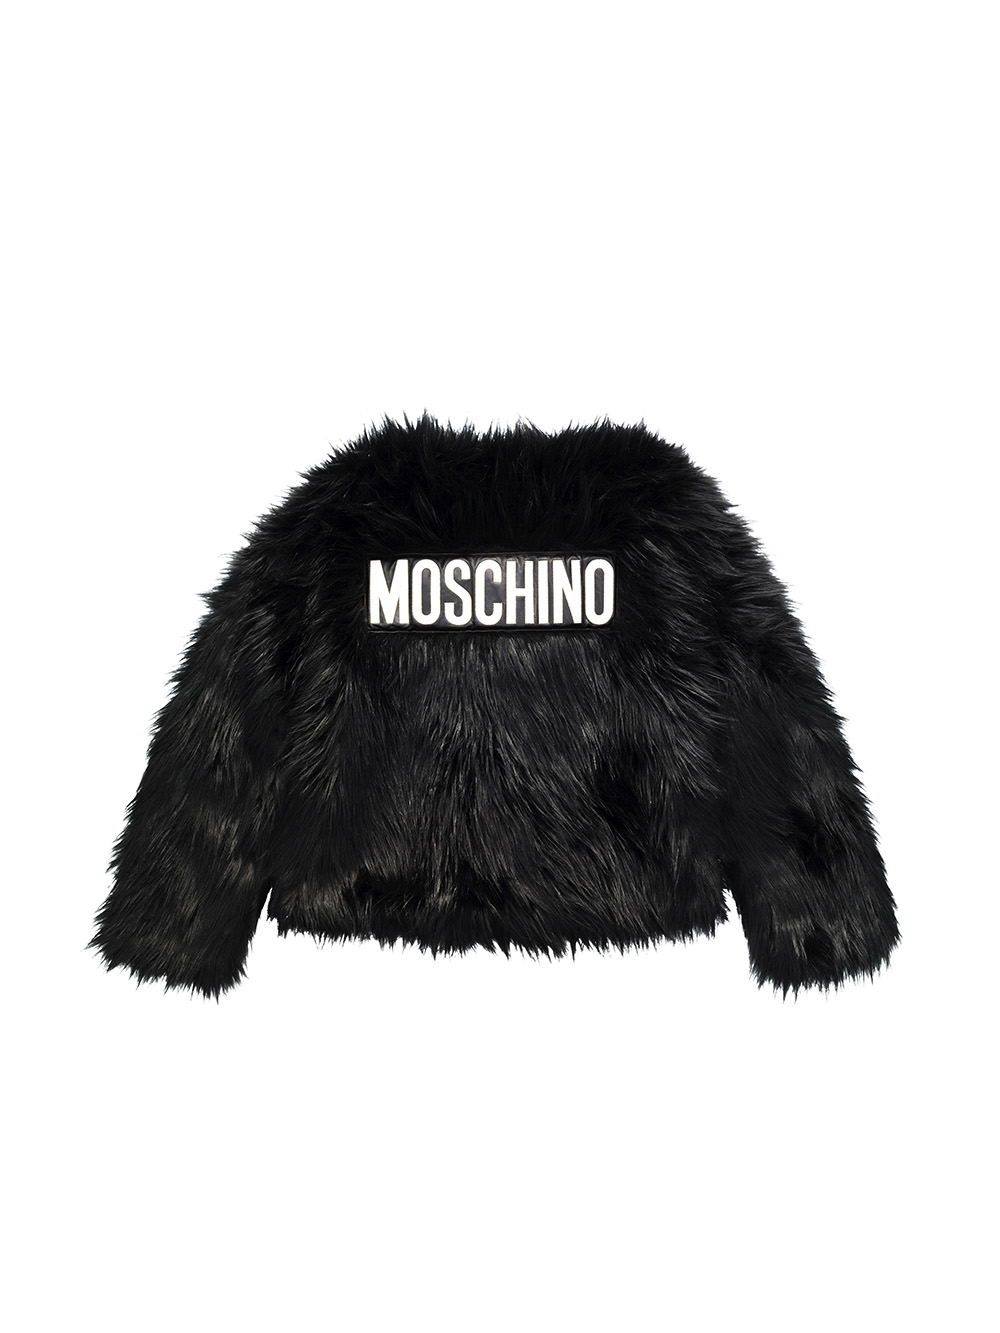 MOSCHINO [TV] H&M Faux Fur Jacket $299.00